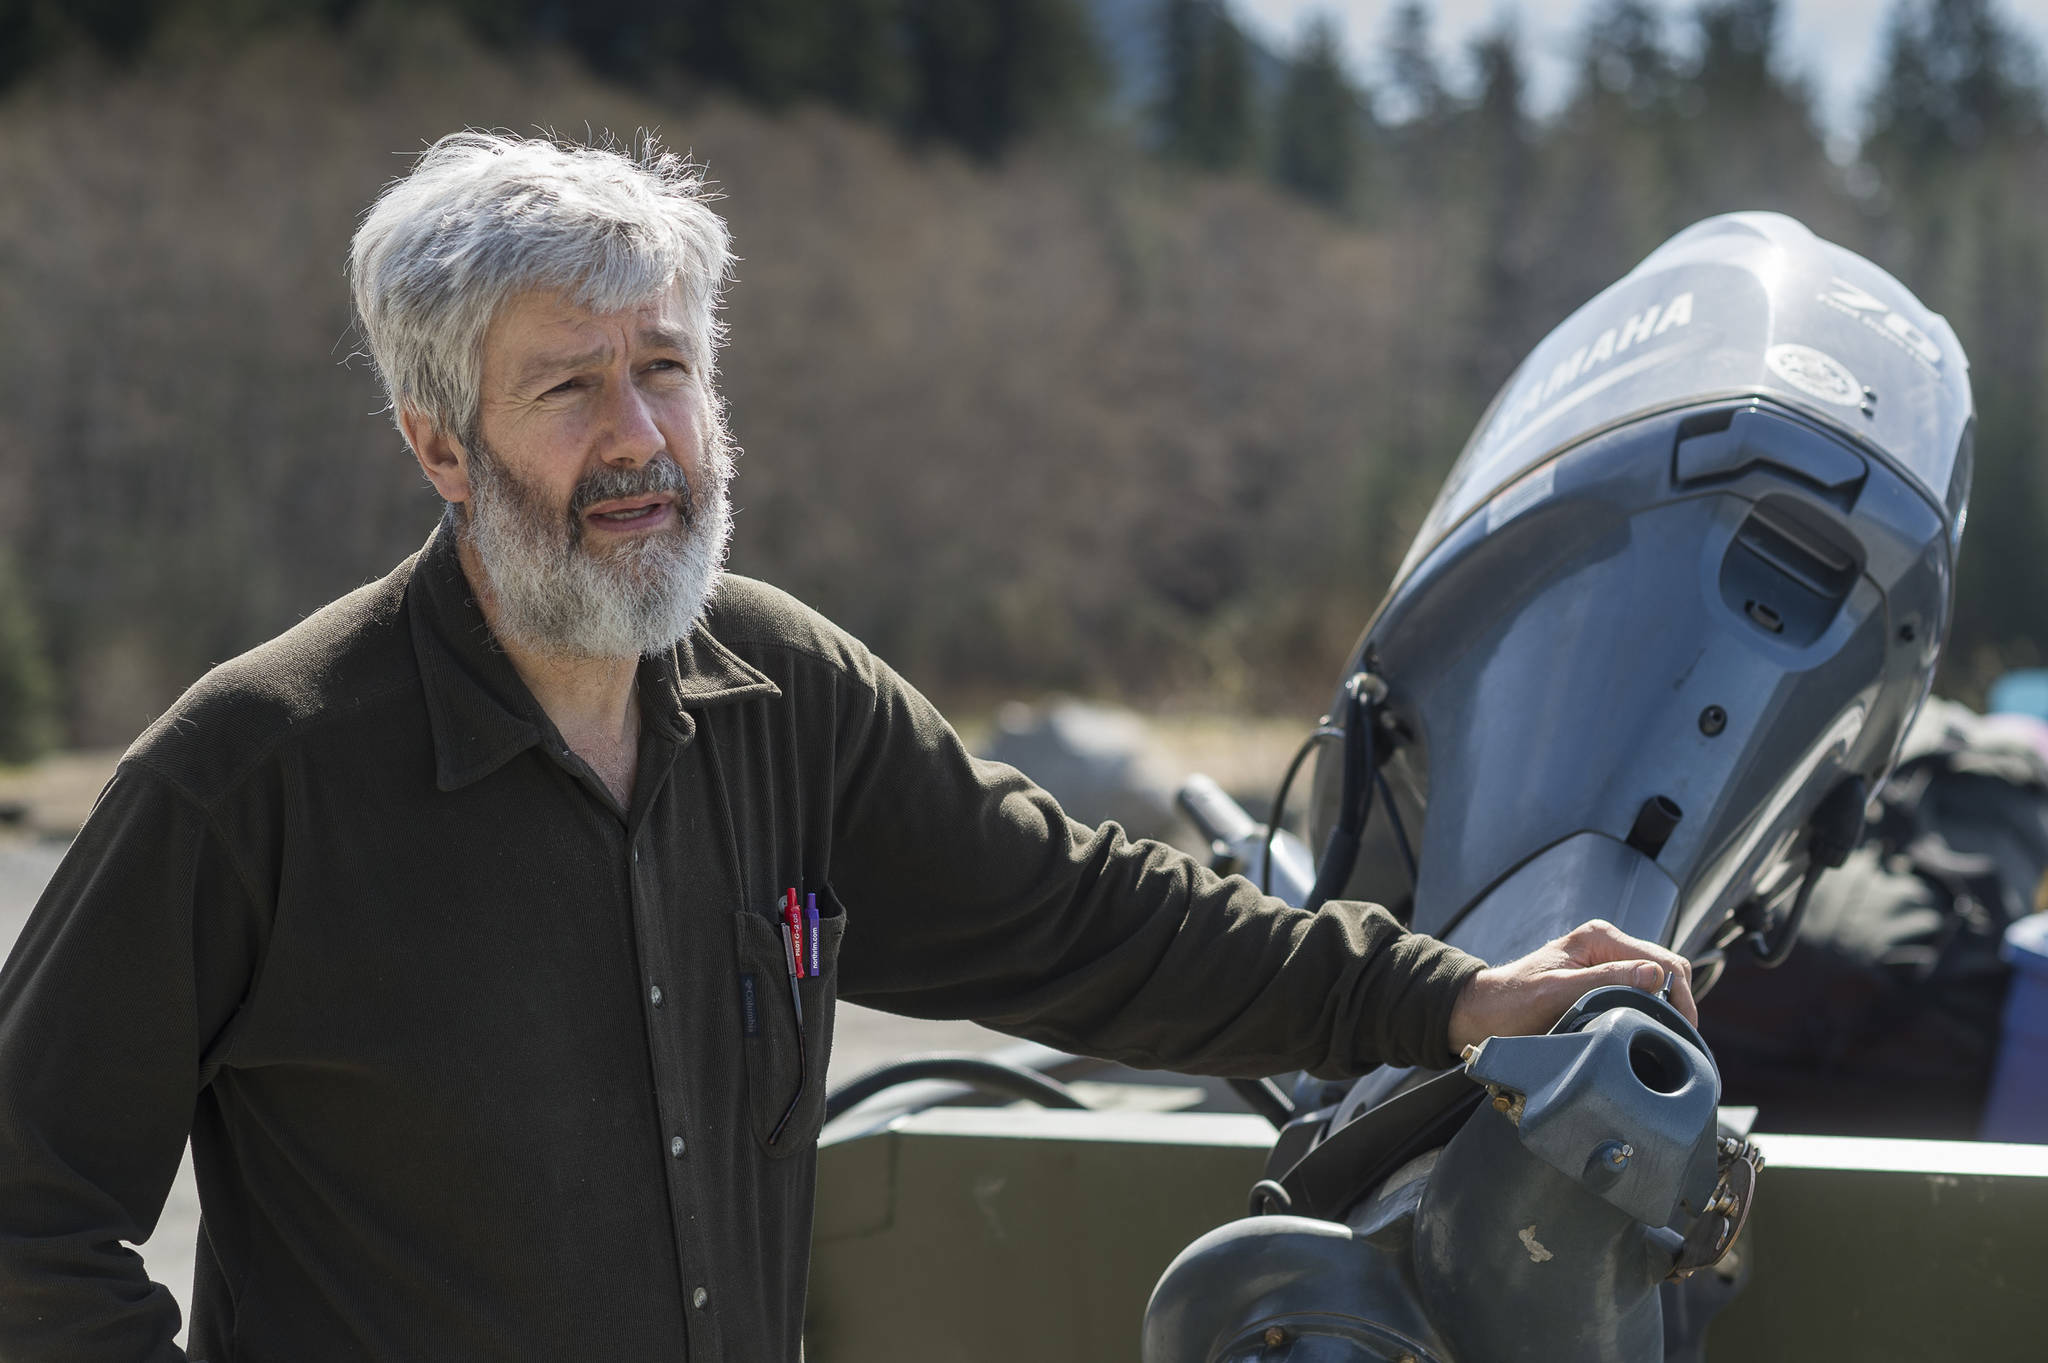 Leon Shaul, a ADFG Fisheries Biologist III who studies coho and other fish species, talks about Southeast Alaska salmon stocks as he helps load boats for staff leaving Echo Cove for a six-week fish study in Berners Bay on Tuesday, May 8, 2018. Shaul, a Douglas resident, has worked for the department for over 30 years. (Michael Penn | Juneau Empire)